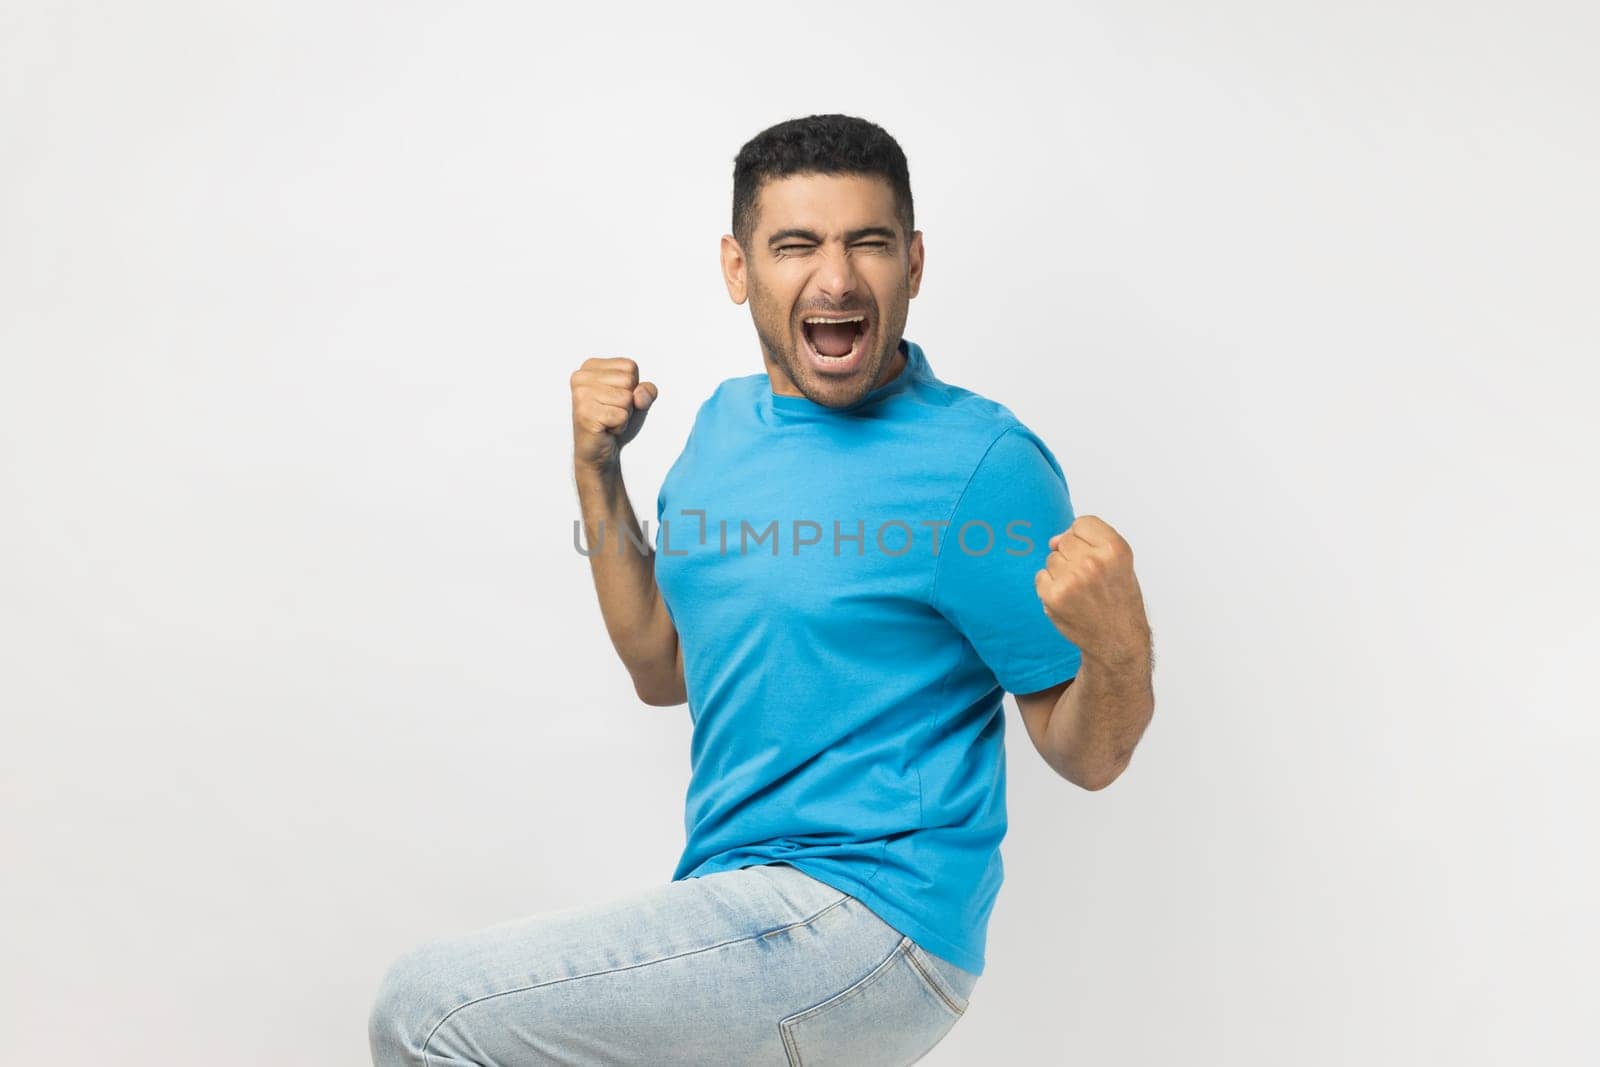 Portrait of unshaven man wearing blue T- shirt standing clenches fists, rejoices his victory and triumph, expresses positiveness, feels like champion. Indoor studio shot isolated on gray background.